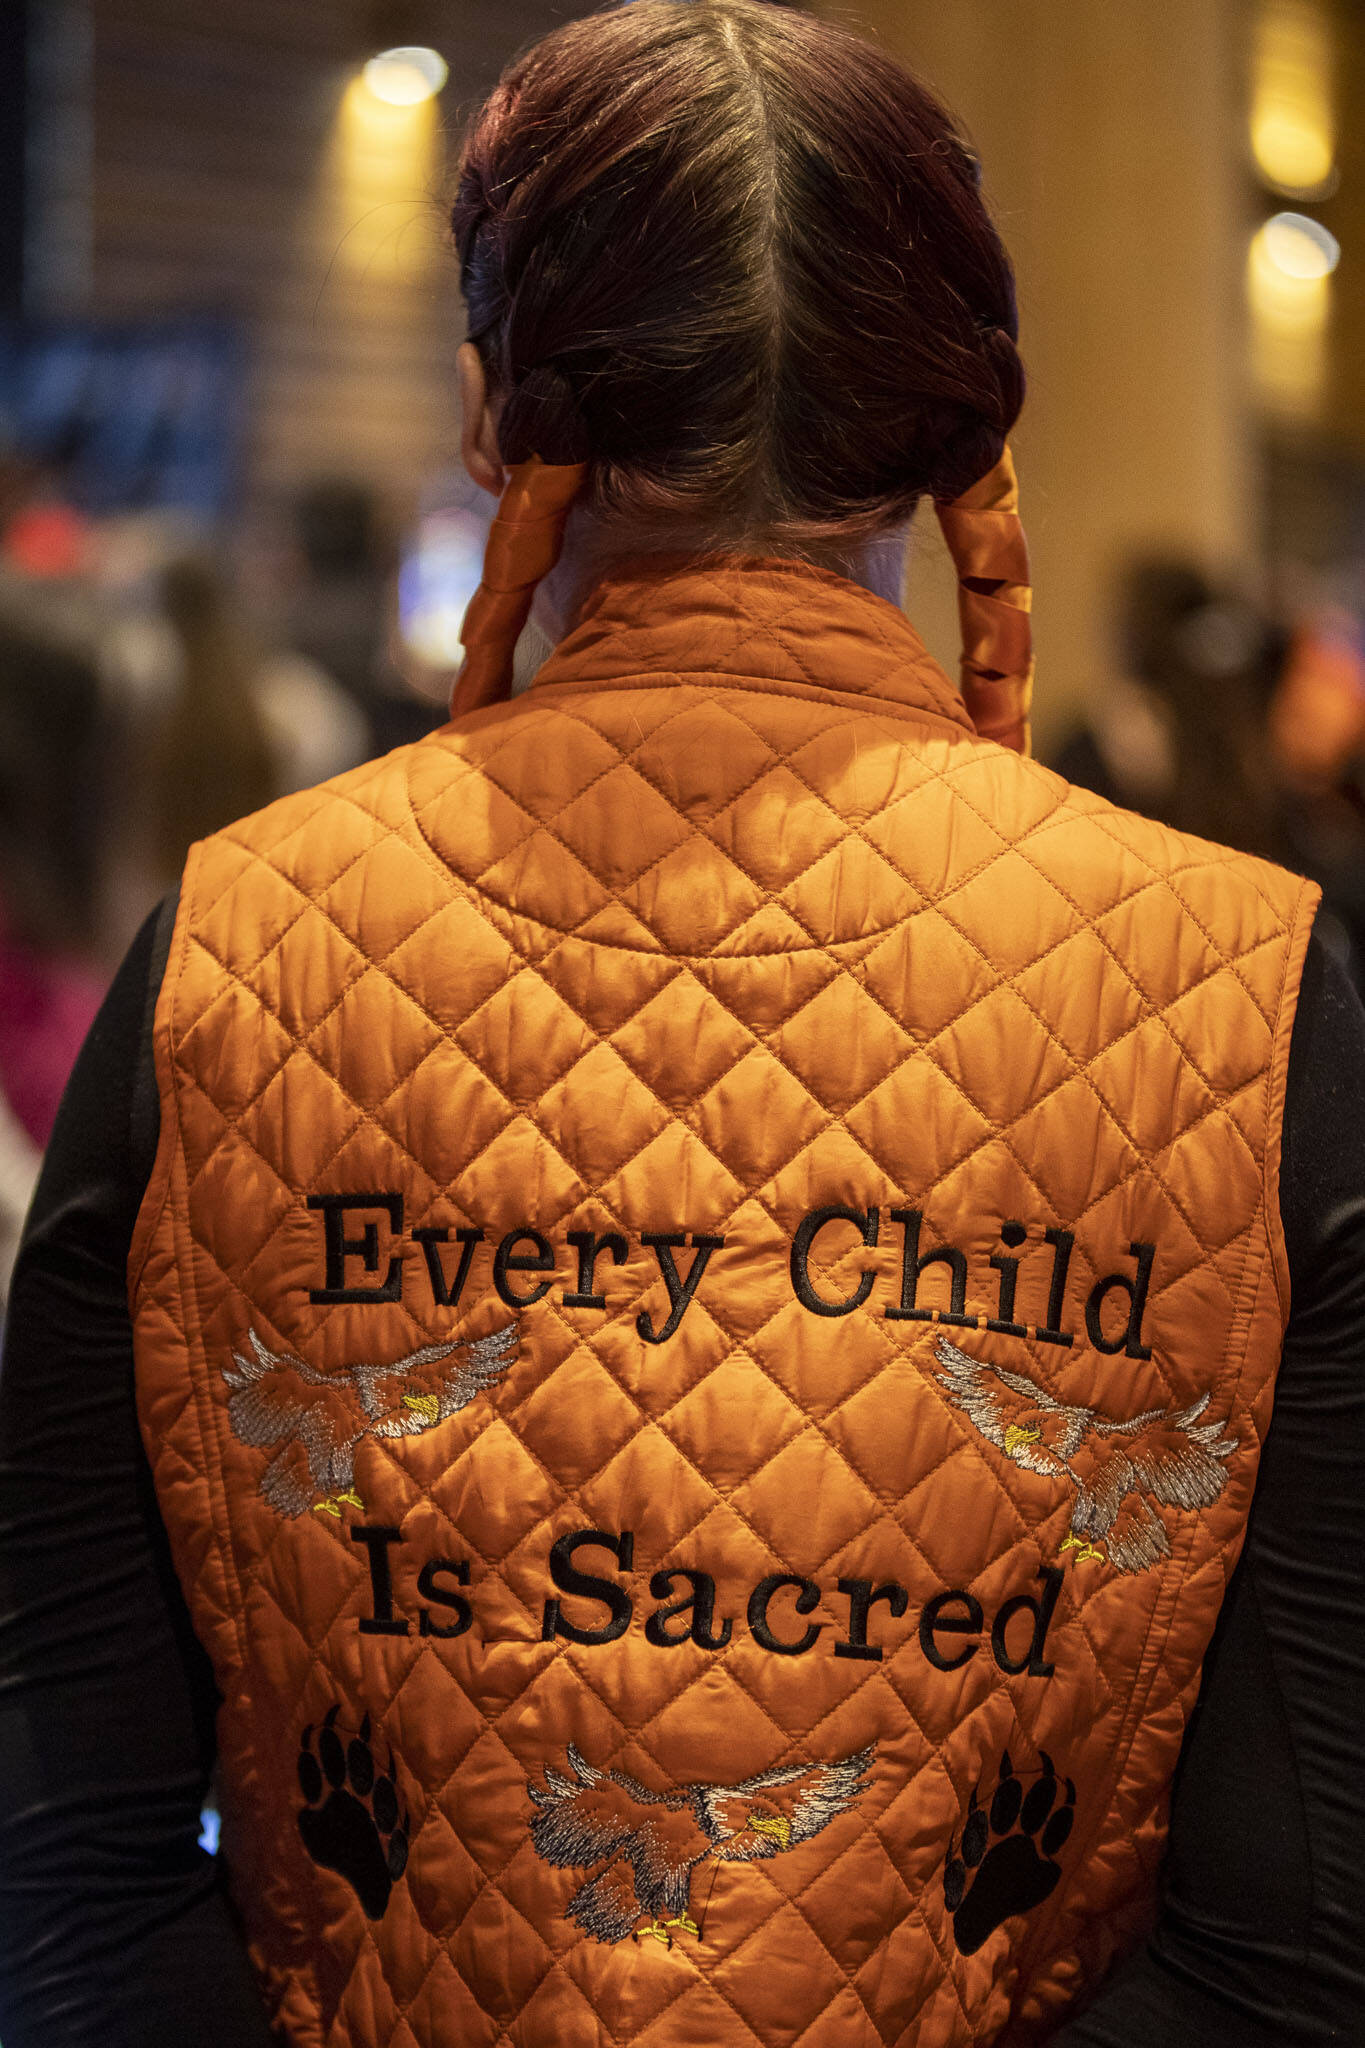 A person wears a vest that says “Every Child Is Sacred” during a Road to Healing event at the Tulalip Gathering Hall in Marysville, Washington on Sunday, April 23, 2023. The tour is lead by United States Secretary of the Interior Deb Haaland and Department of the Interior Assistant Secretary Bryan Newland. (Annie Barker / The Herald)